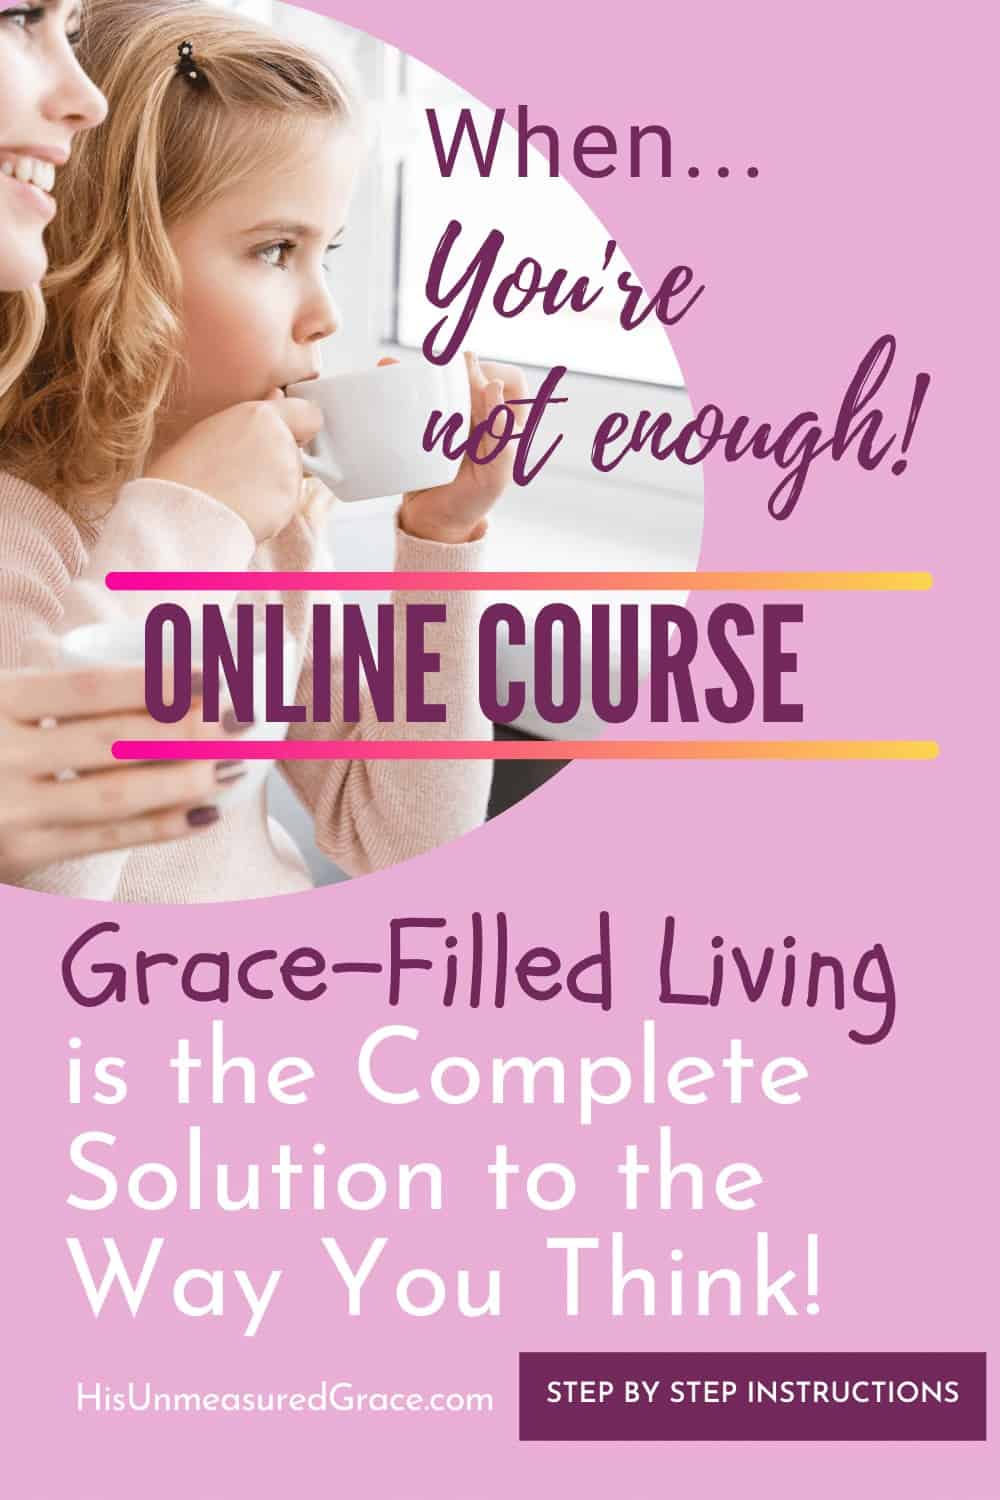 Grace-Filled Living is the Complete Solution to the Way You Think